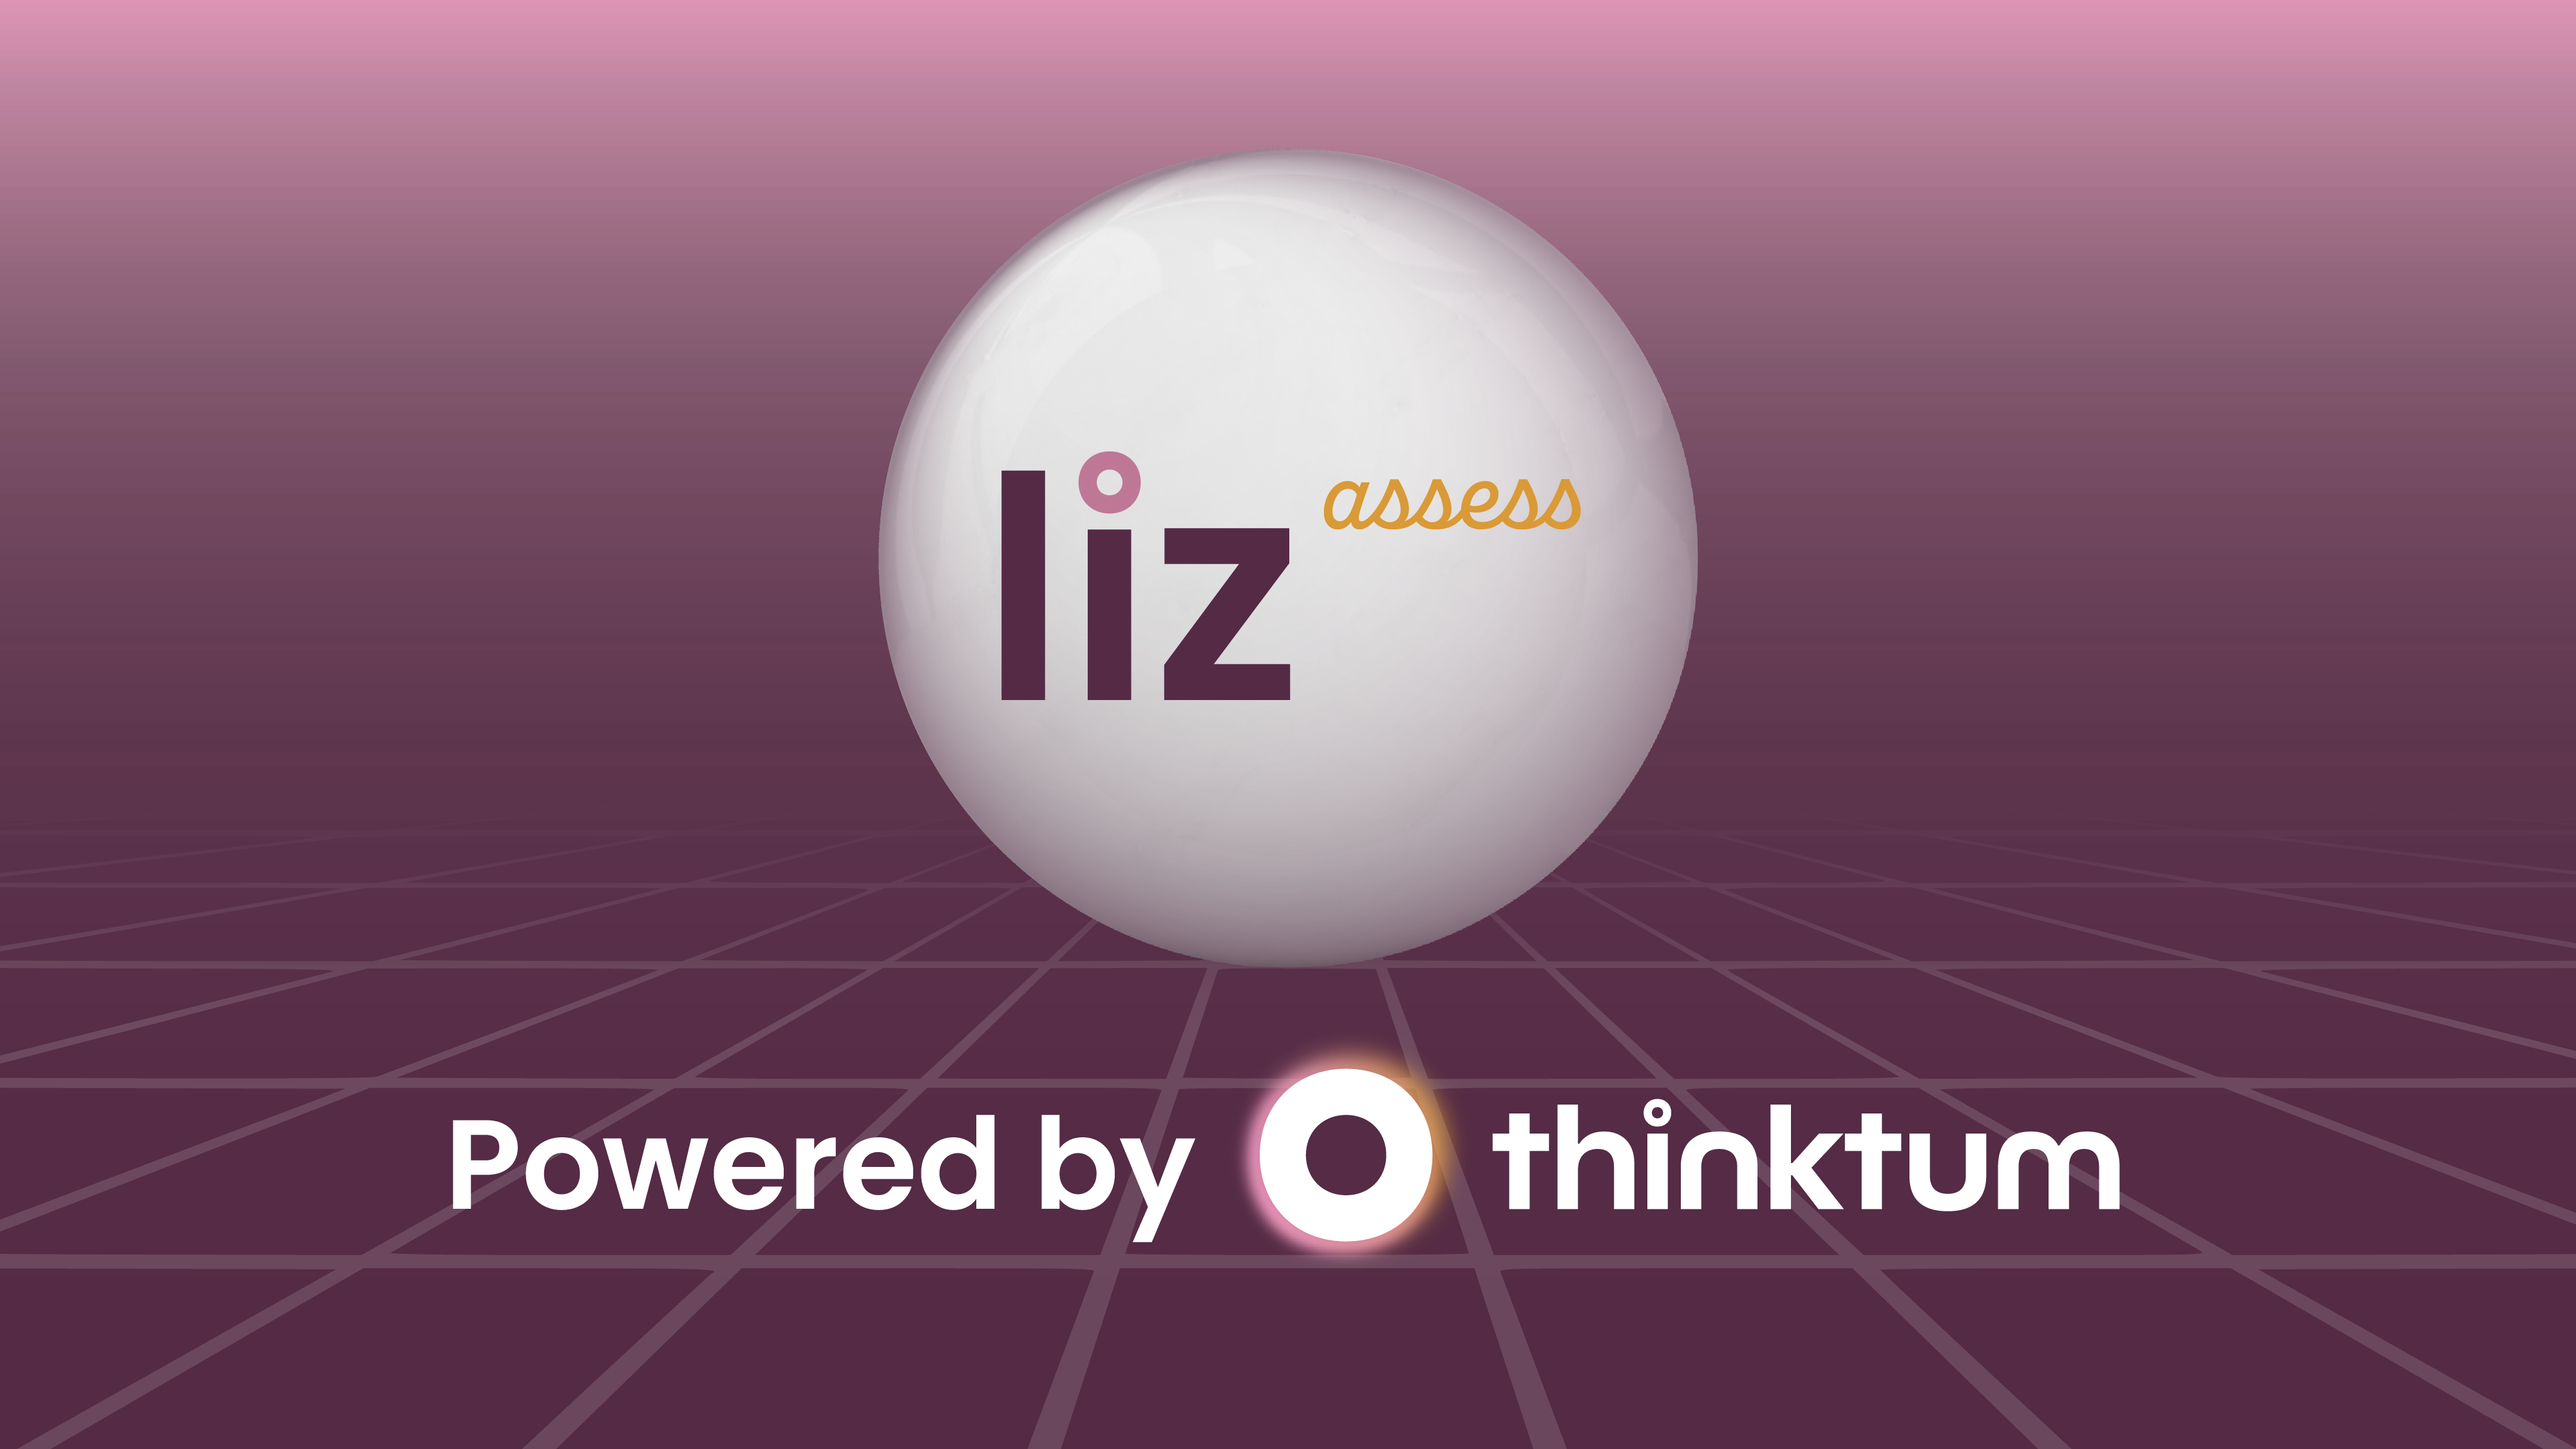 Purple background, white circle with liz assess on it. Powered by thinktum below.